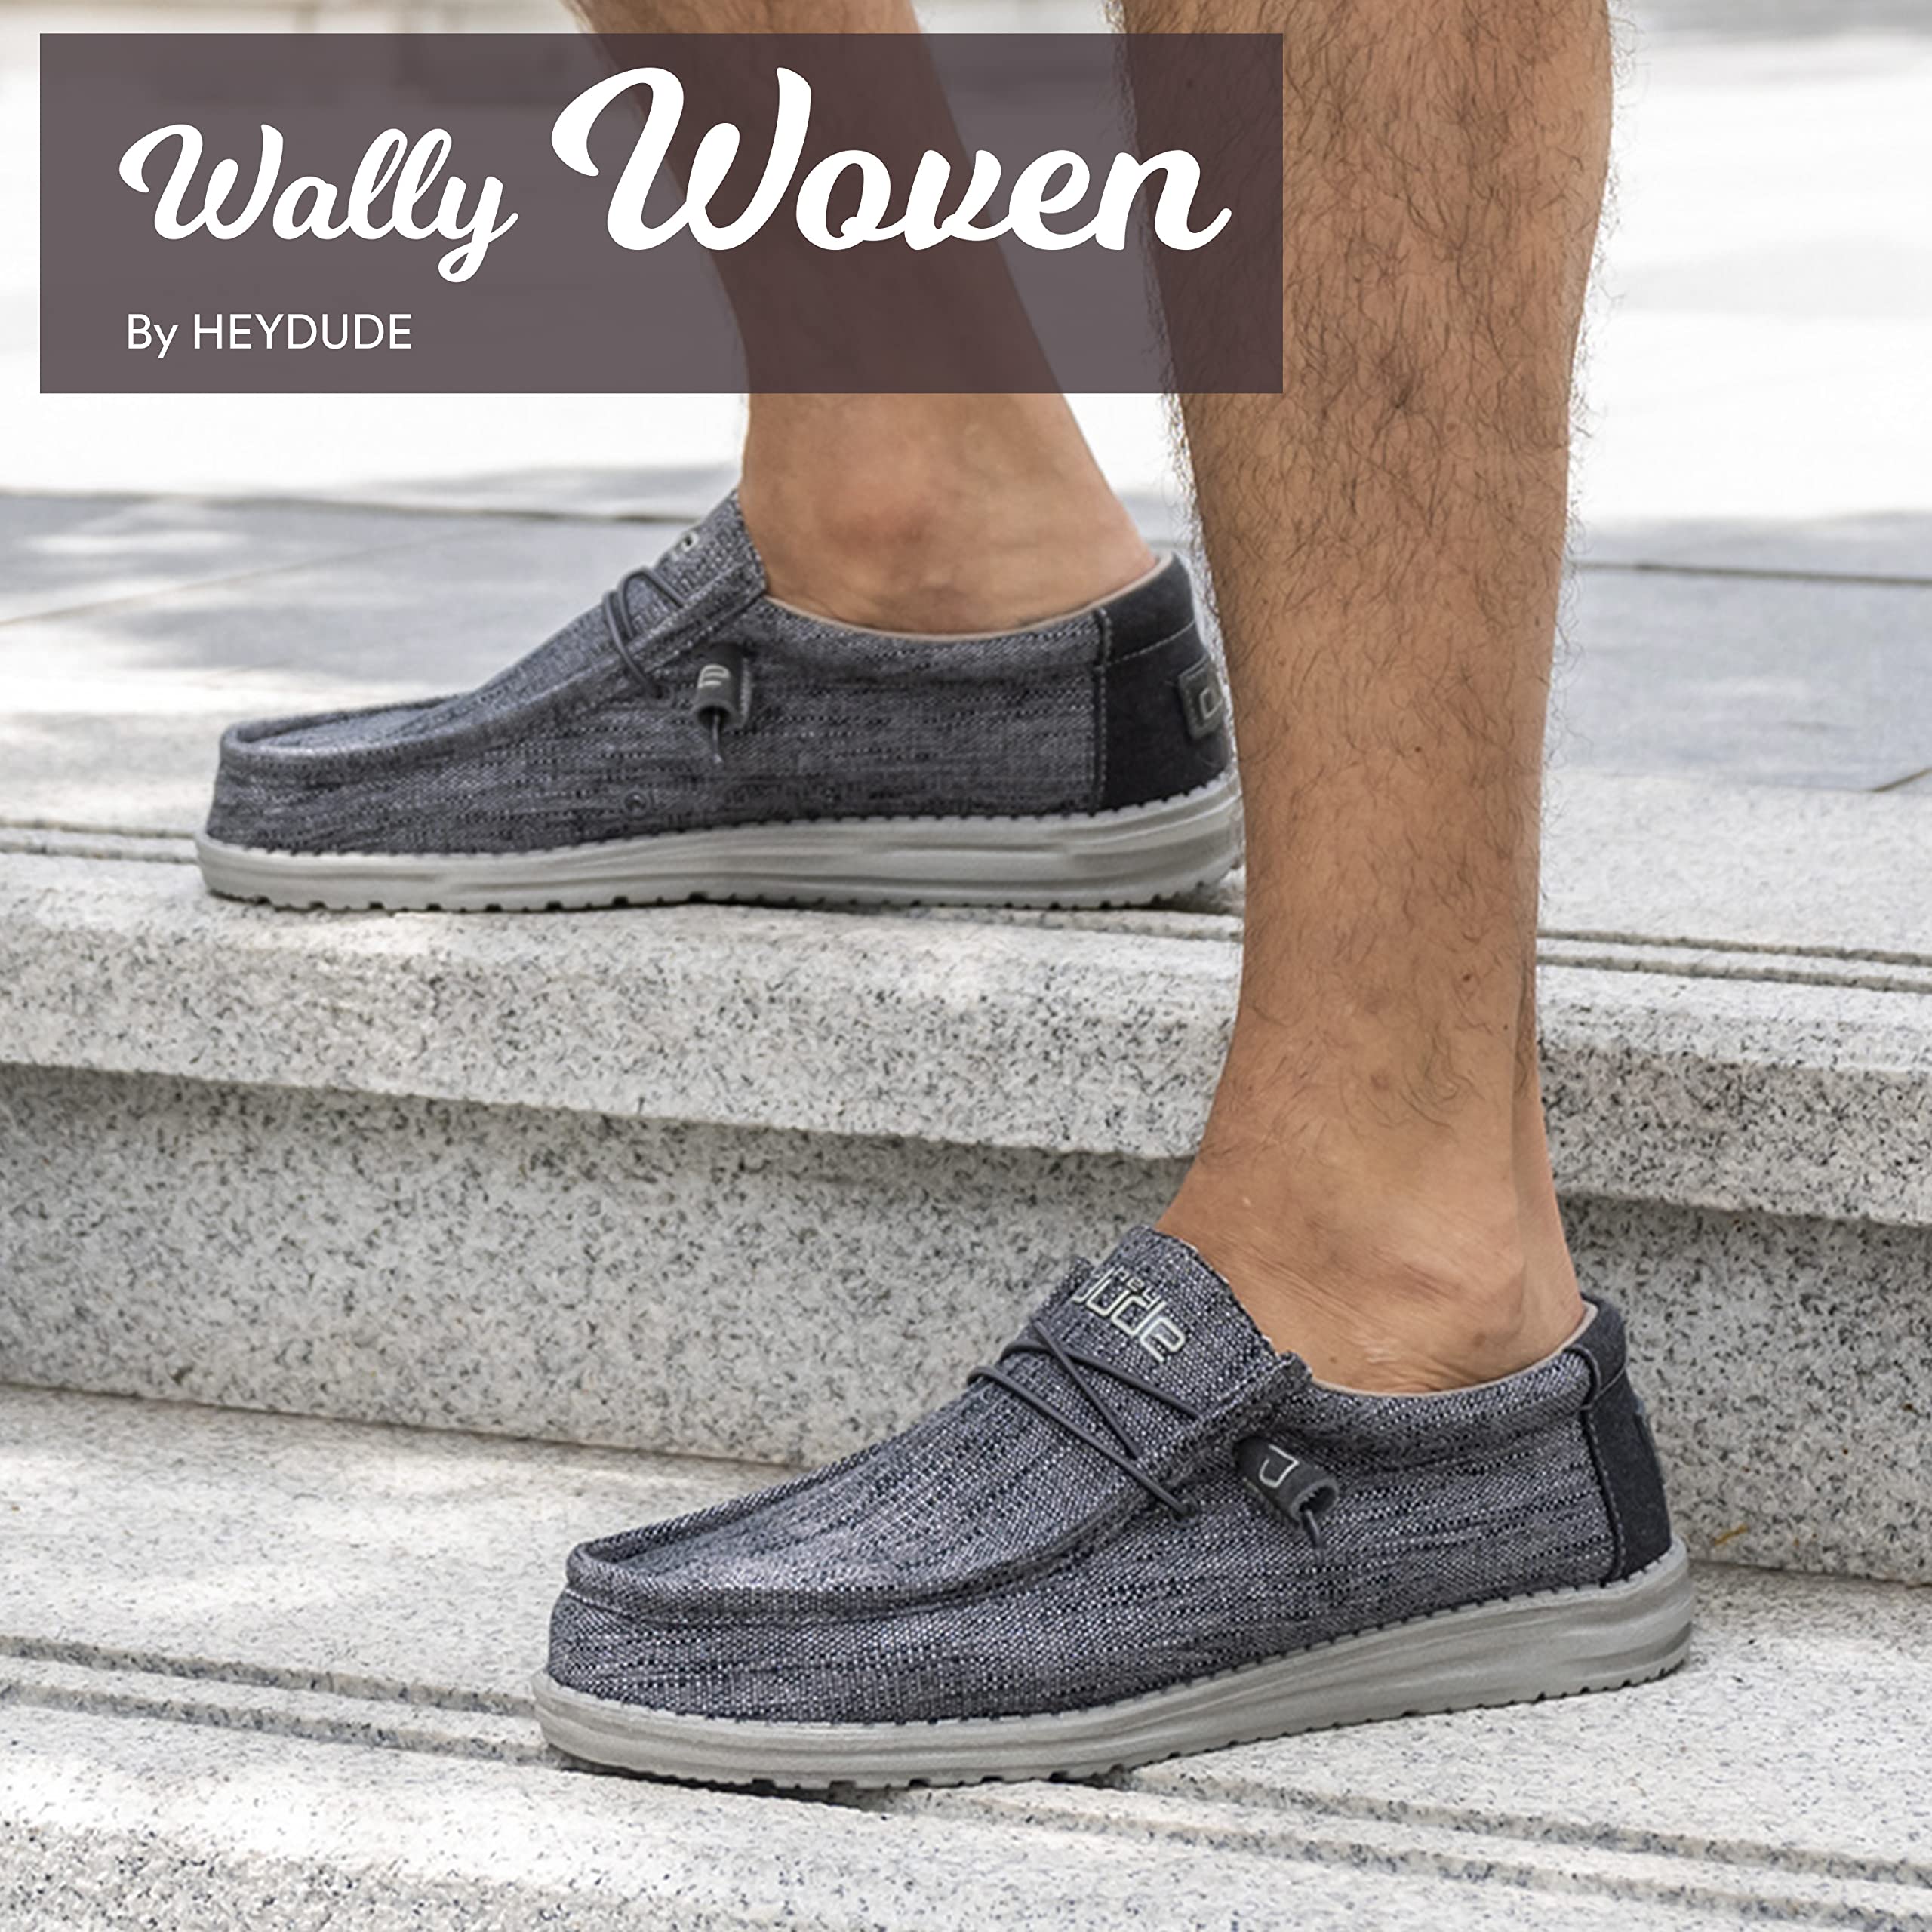 Hey Dude Men's Wally Sox Bee Multiple Colors | Men’s Shoes | Men's Lace Up Loafers | Comfortable & Light-Weight